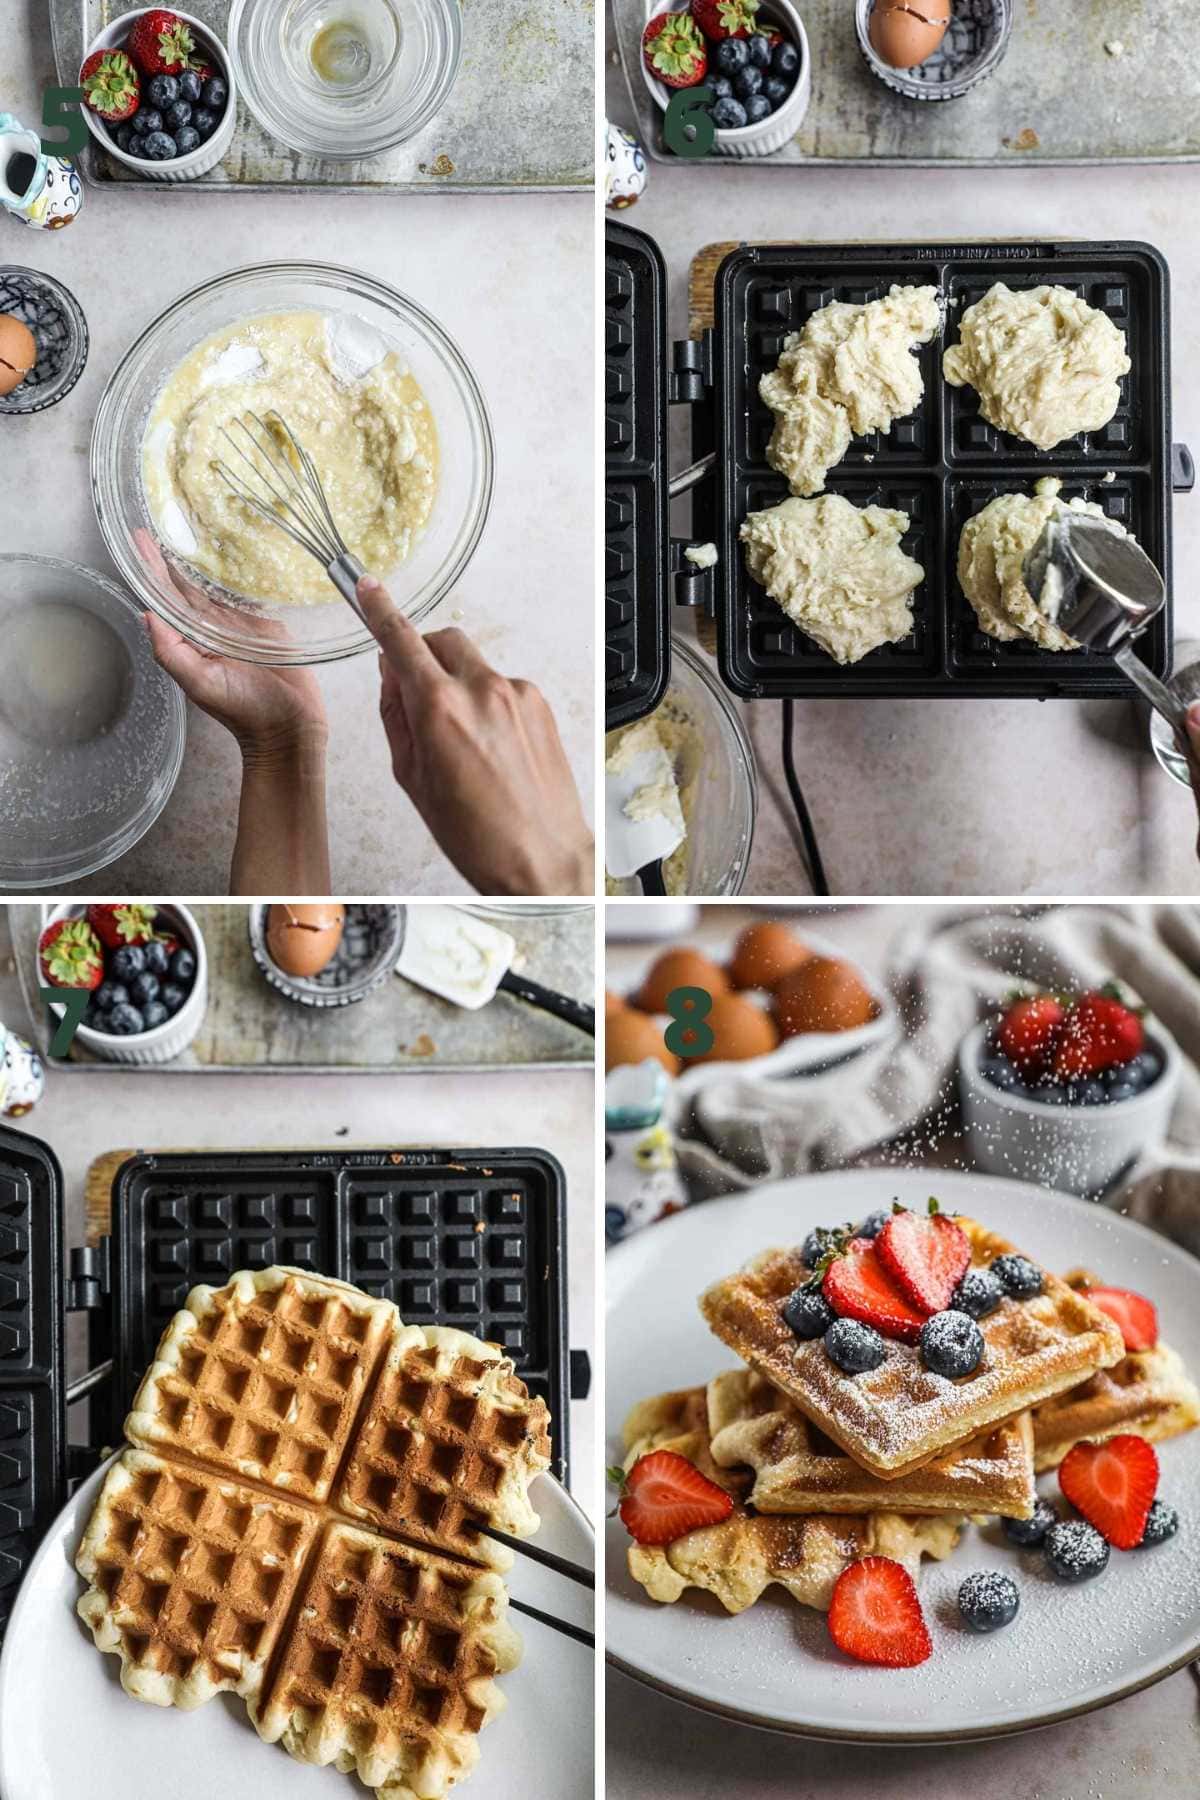 Steps to make gluten-free mochi waffles, including mixing the ingredients, add the batter to the waffle iron, cooking the waffles, and serving with powdered sugar, syrup, and fruit.